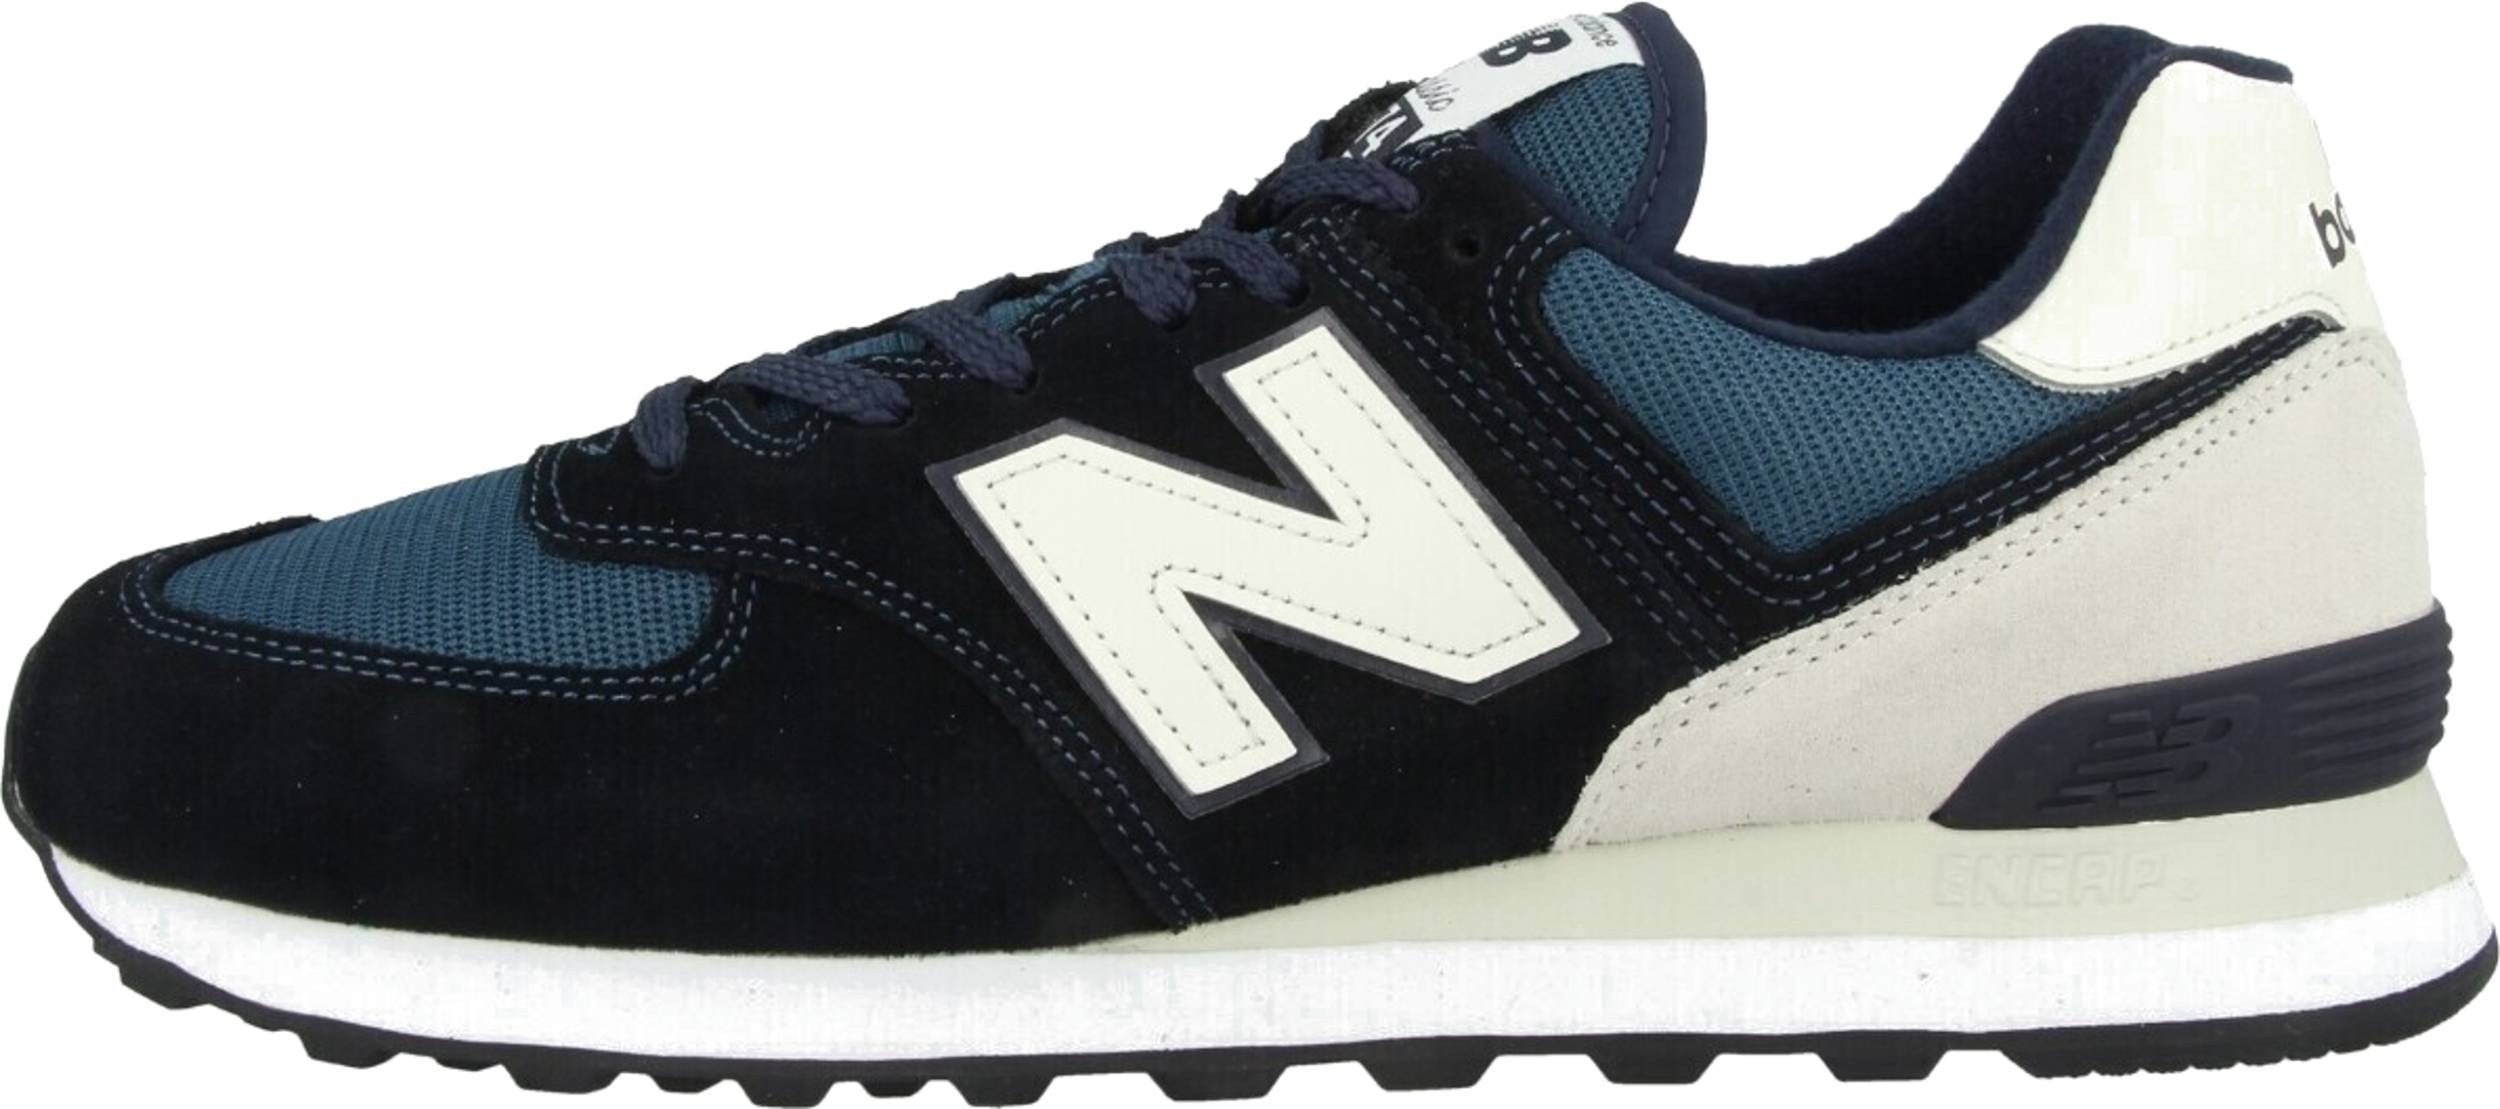 New Balance 574 sneakers in 6 colors (only $48) | RunRepeat